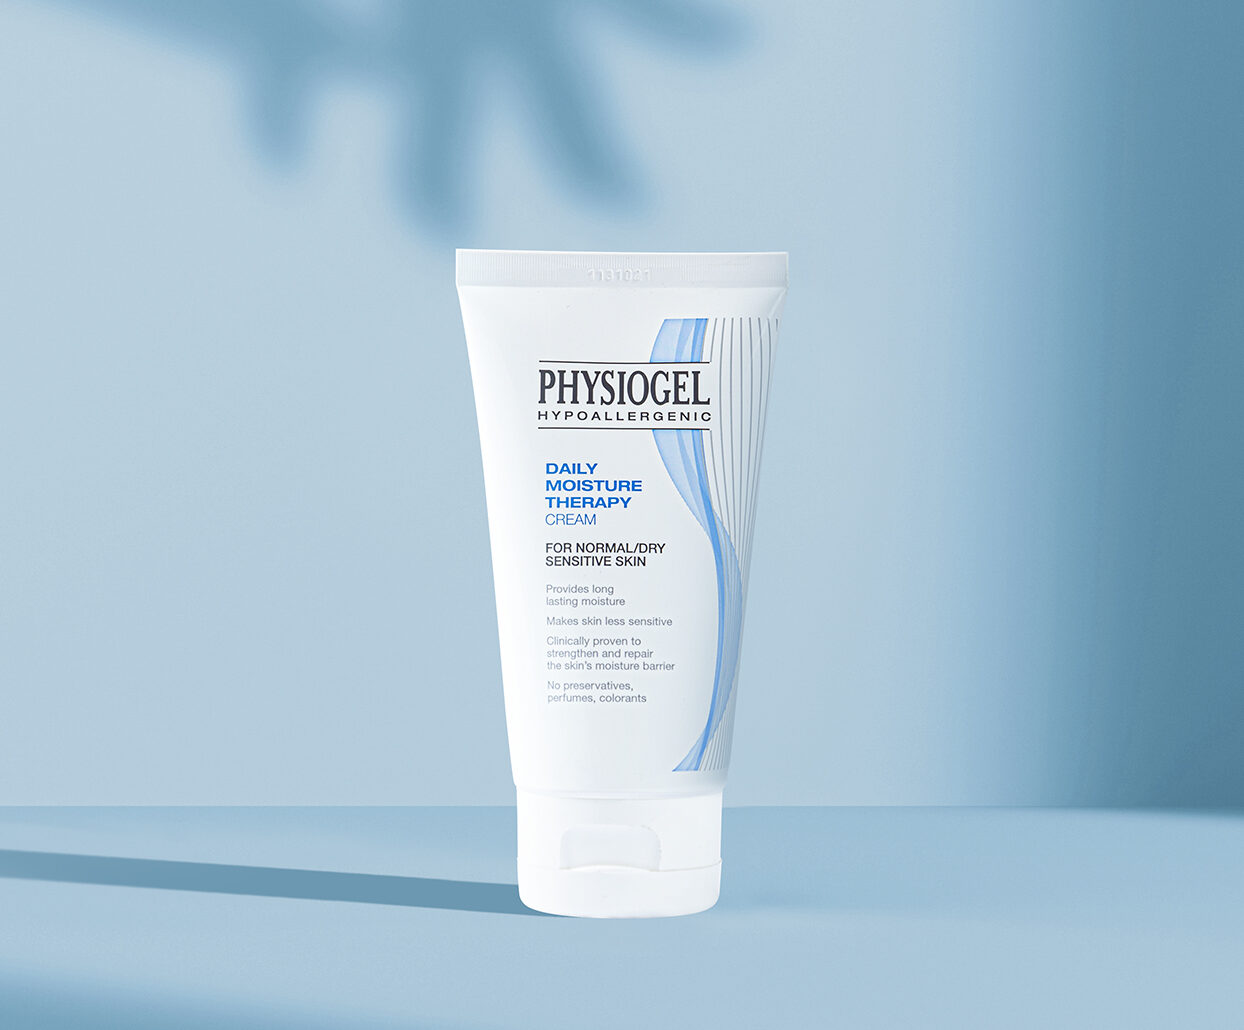 “Physiogel Daily Moisture Therapy Cream” Will Intensely Nourish And Smooth Your Skin